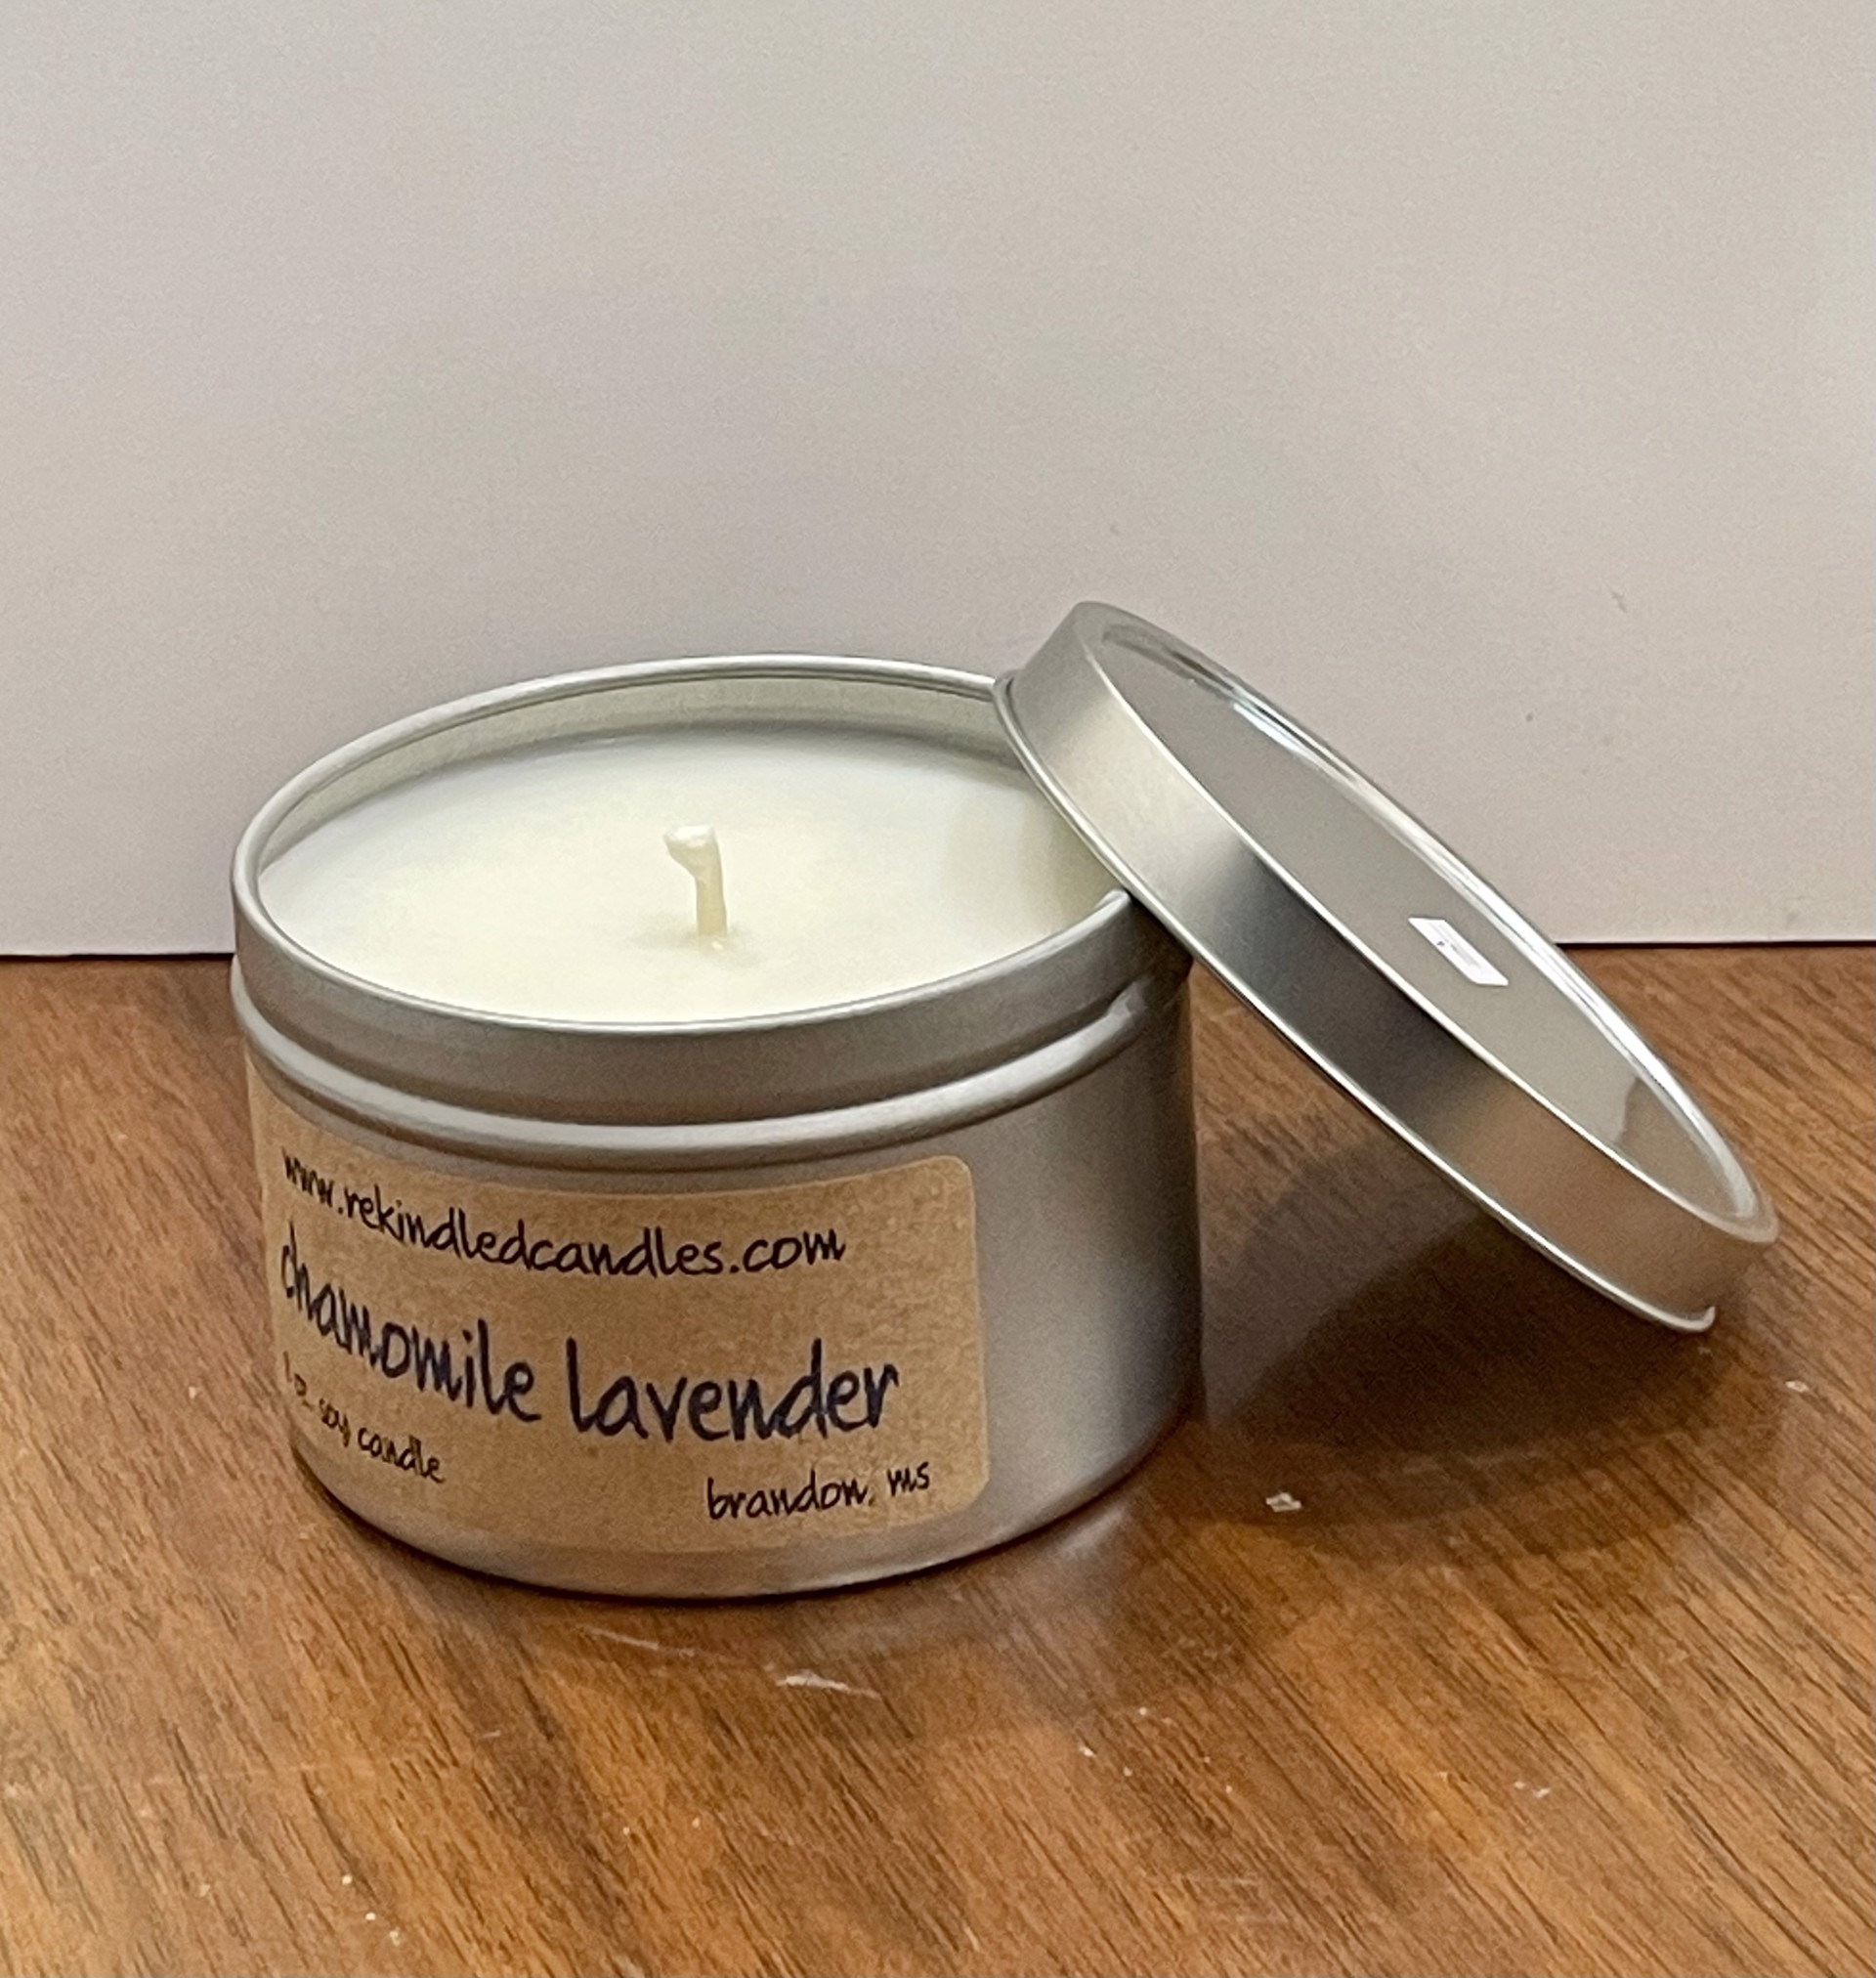 Chamomile Lavender Candle Tin by re-kindled candle company